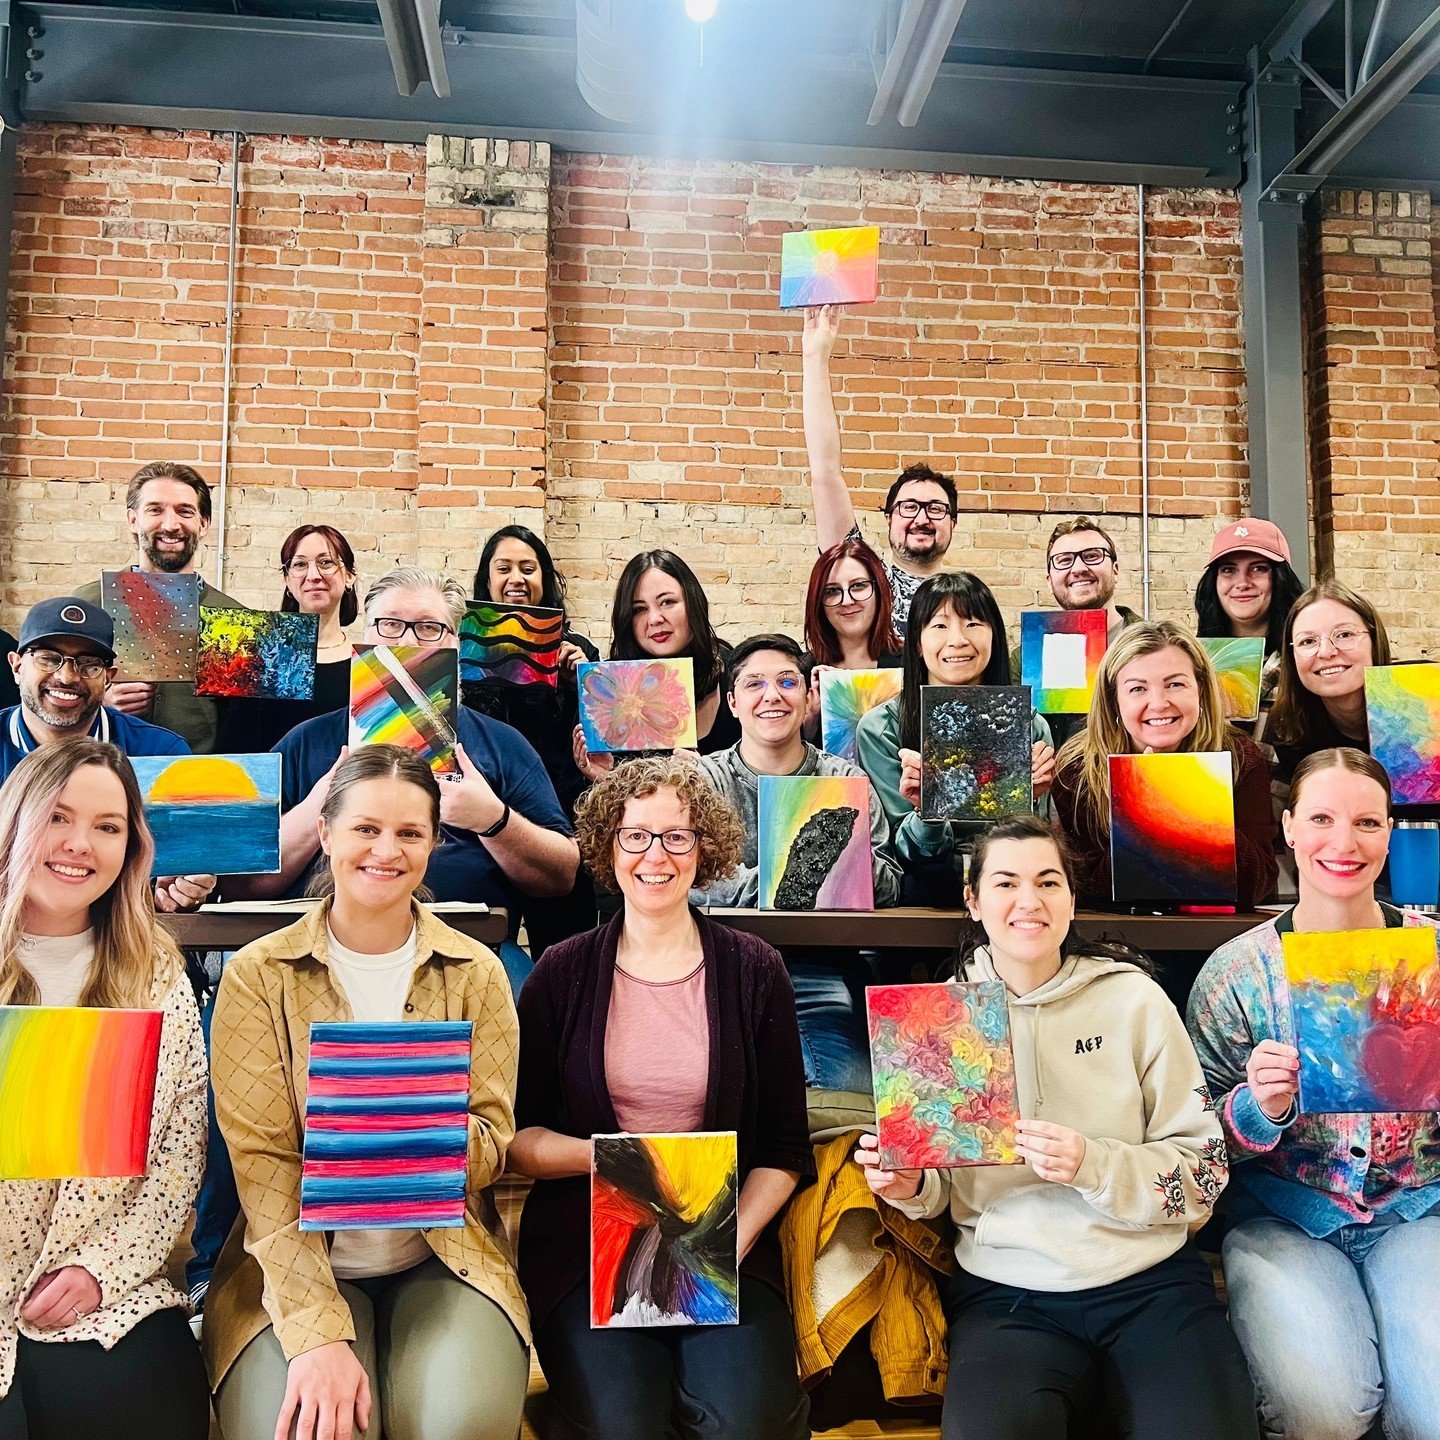 🎨🧠 Earlier this week, in celebration of #MentalHealthWeek (May 6-12), the Qi Creative team got creative with some right brain exercises! We enjoyed exploring the healing power of art and creativity, painting, and expressing ourselves together! 🌈 
